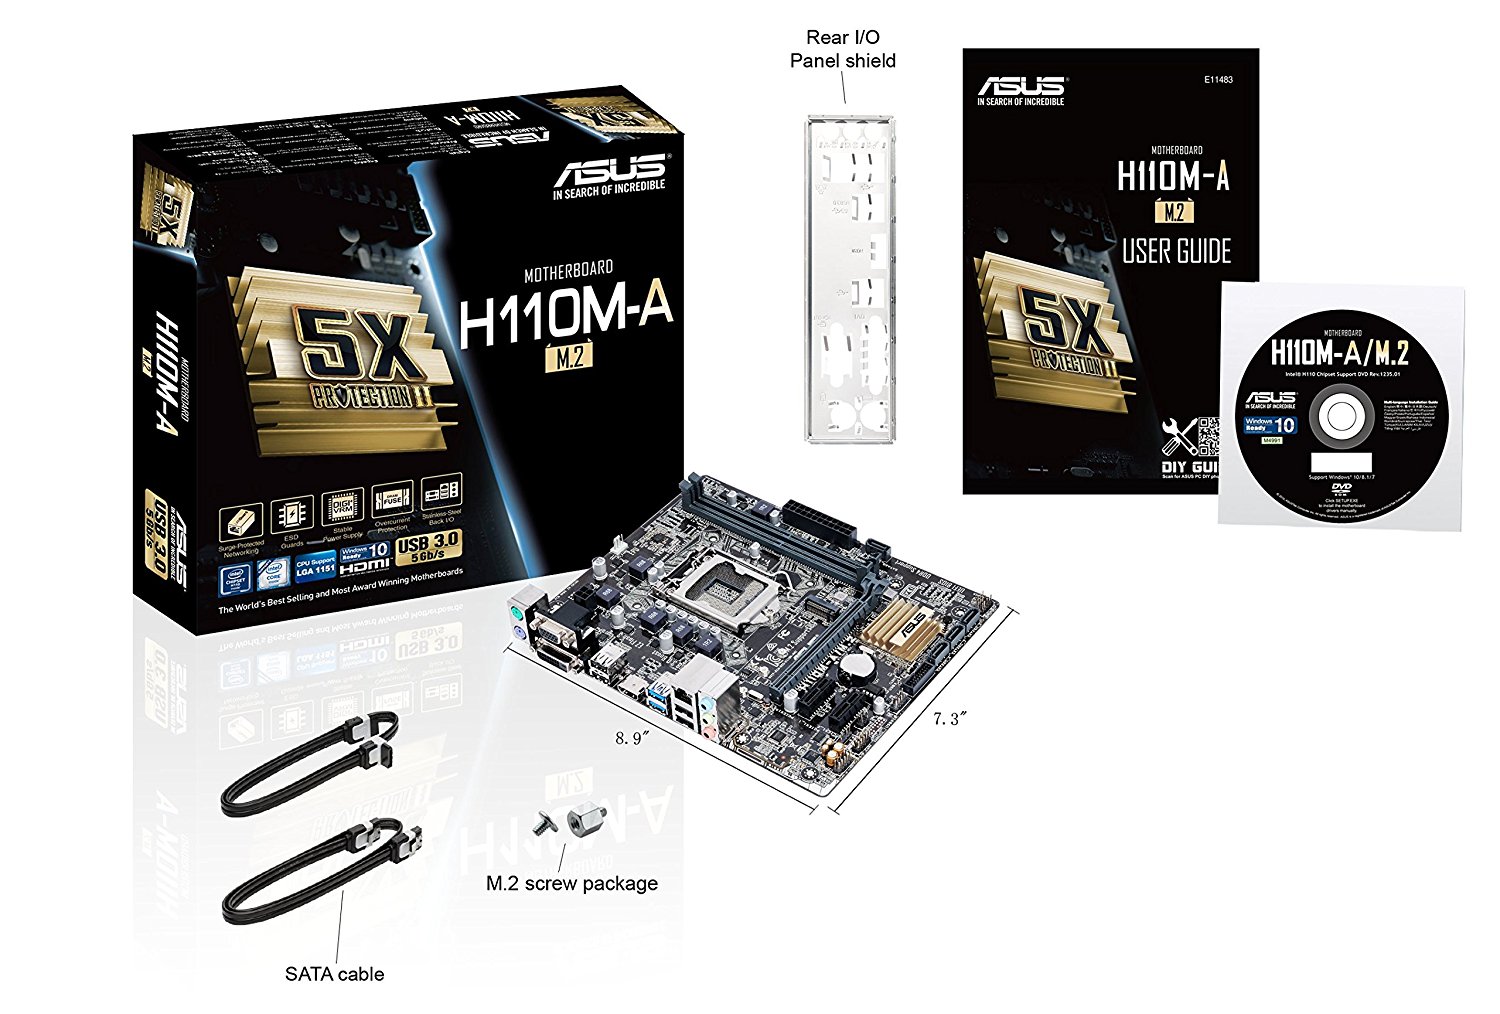 Asus H110M-A/M.2 Motherboard - H110M-A/M.2 - image 4 of 6